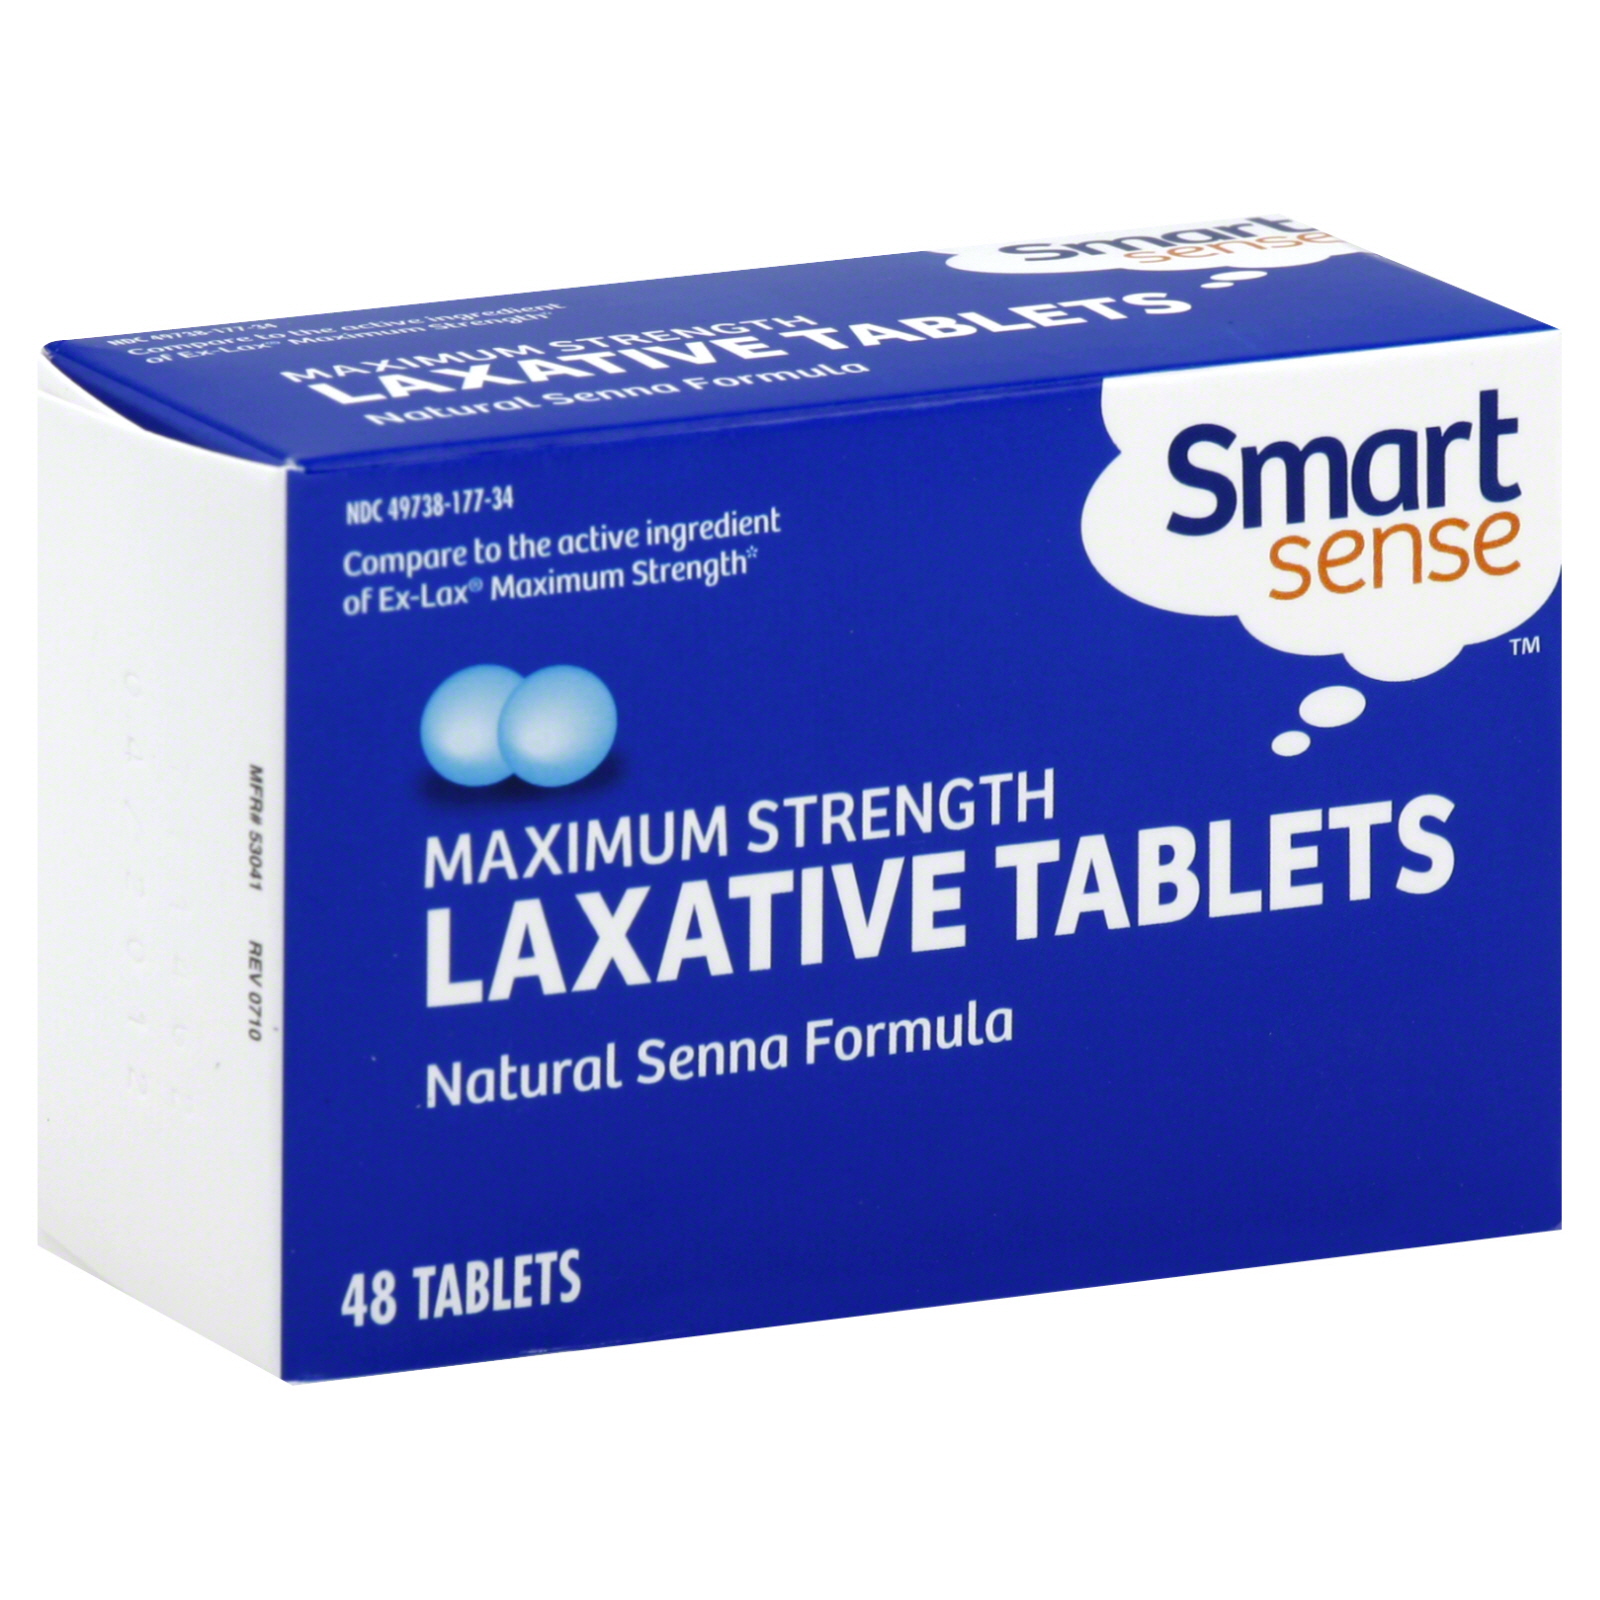 Laxative Tablets, Maximum Strength, Tablets 48 tablets